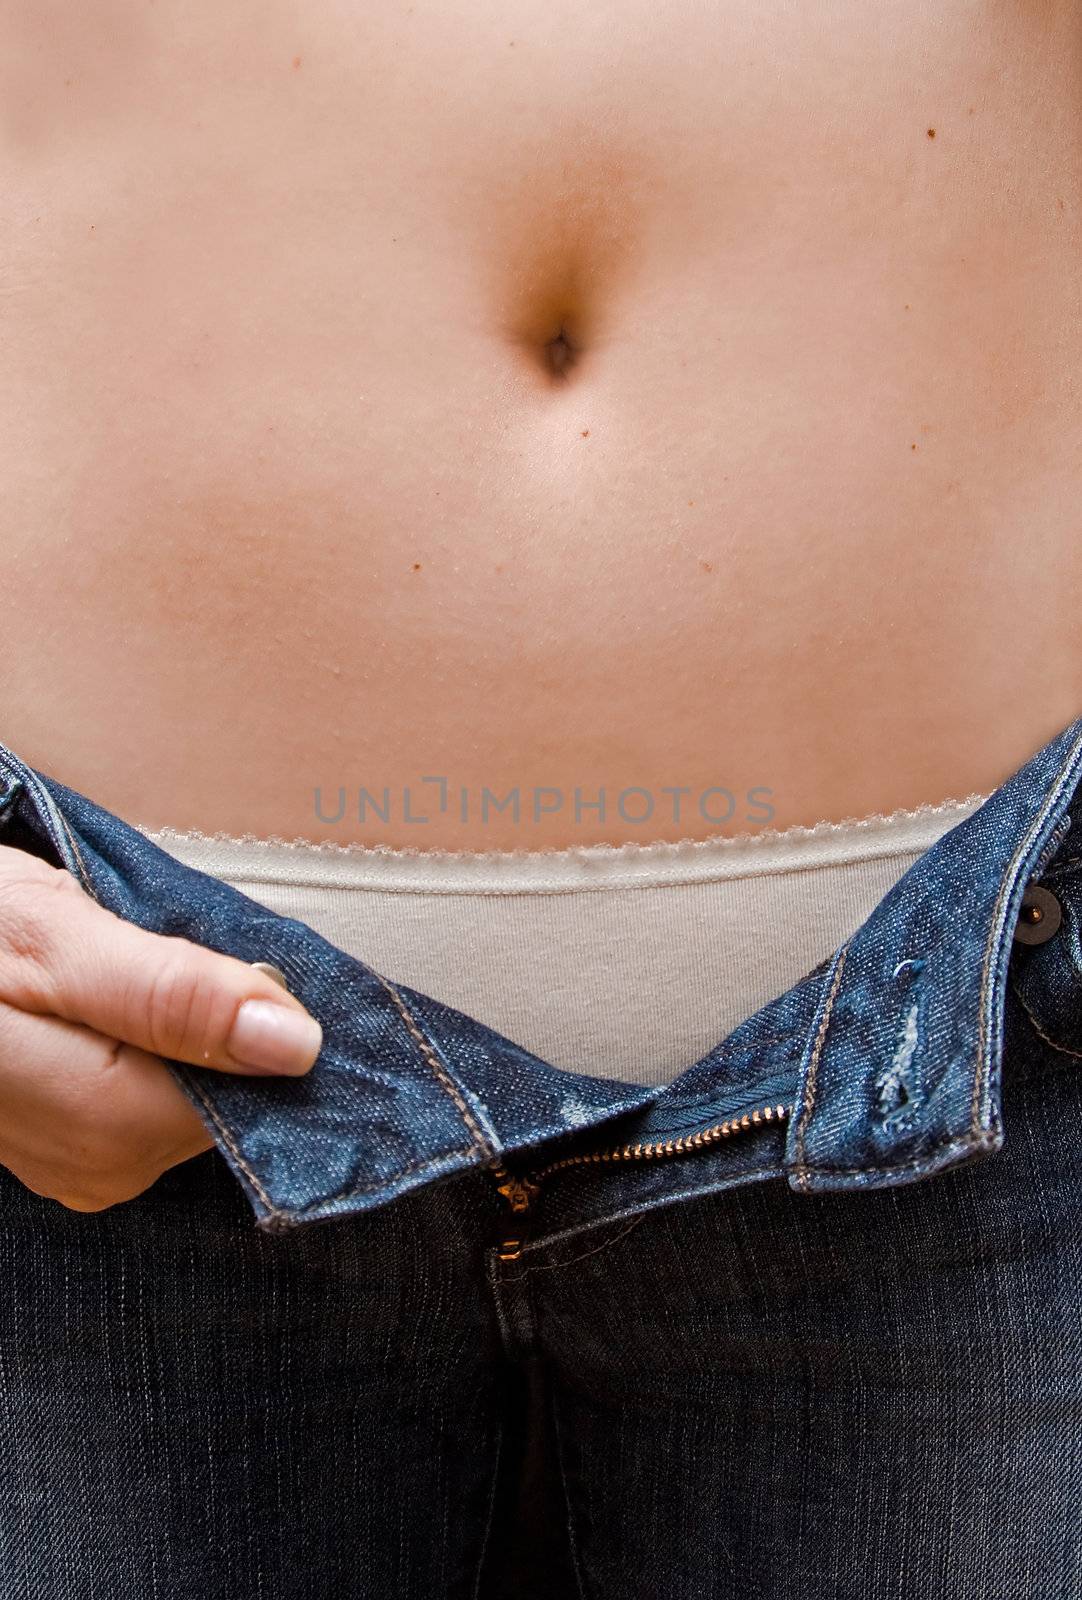 Young woman opening her blue jeans showing a rim of her white underware and bare belly up to her bellybutton